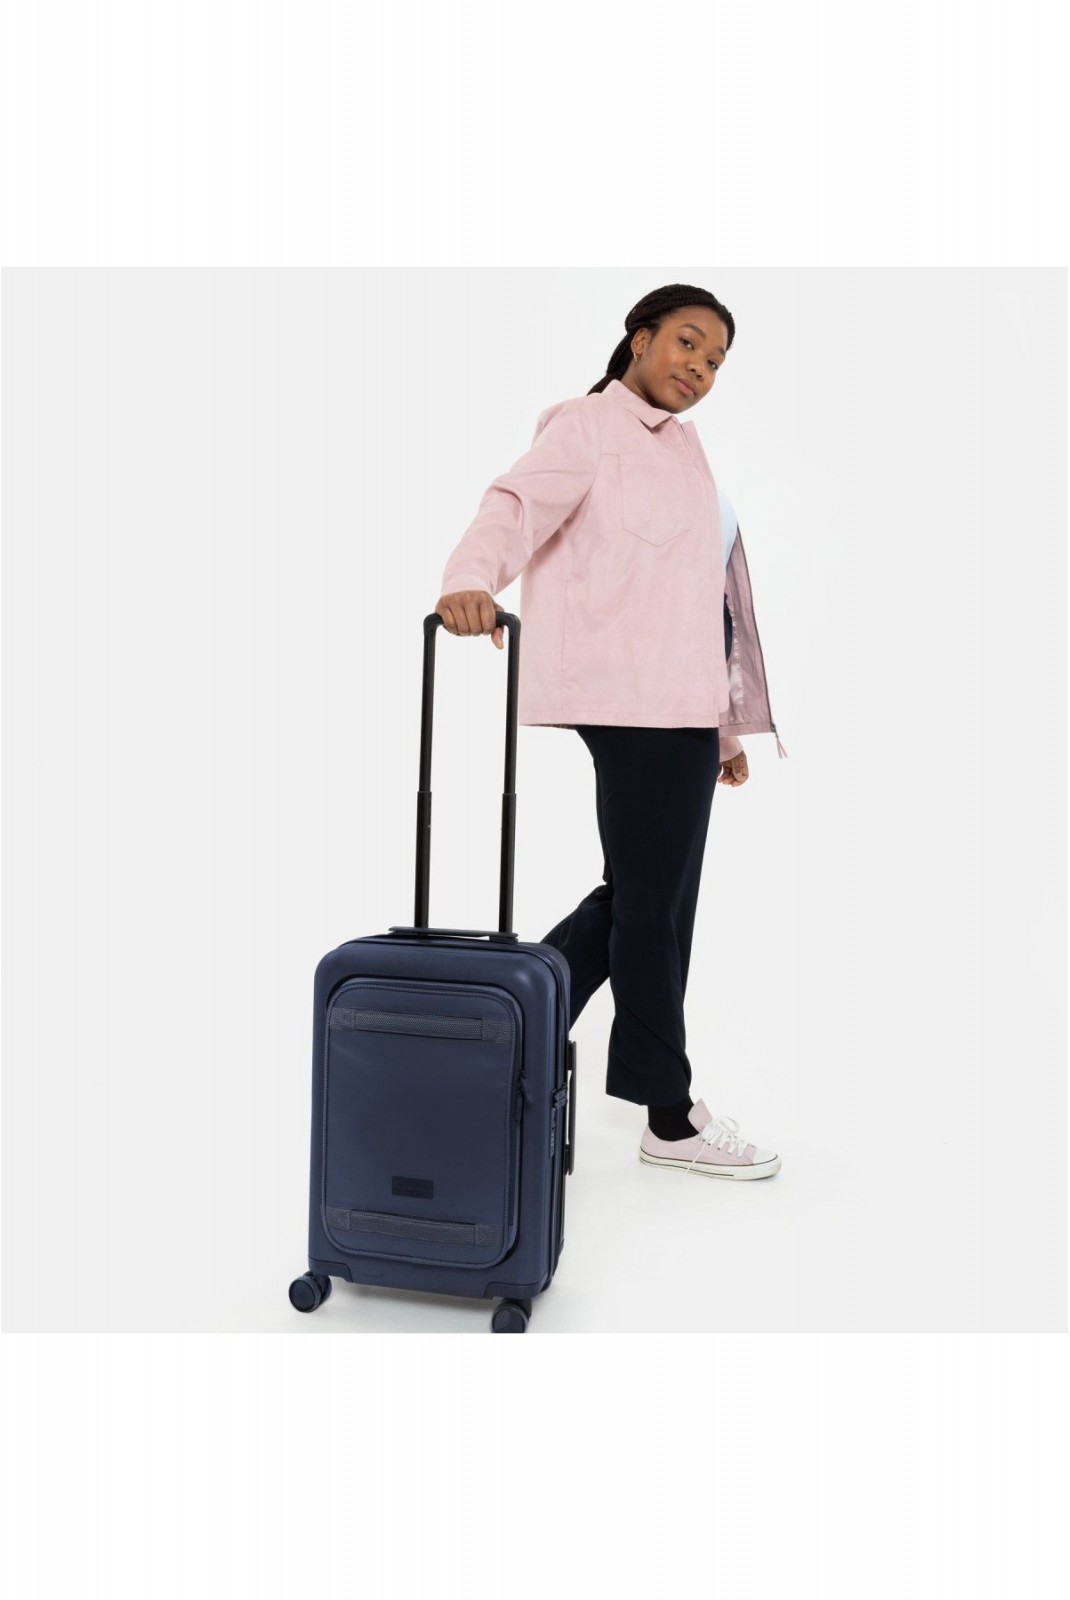 Bagage cabine connect taille S Eastpak CNNCT Marine EK0A5BBYO161